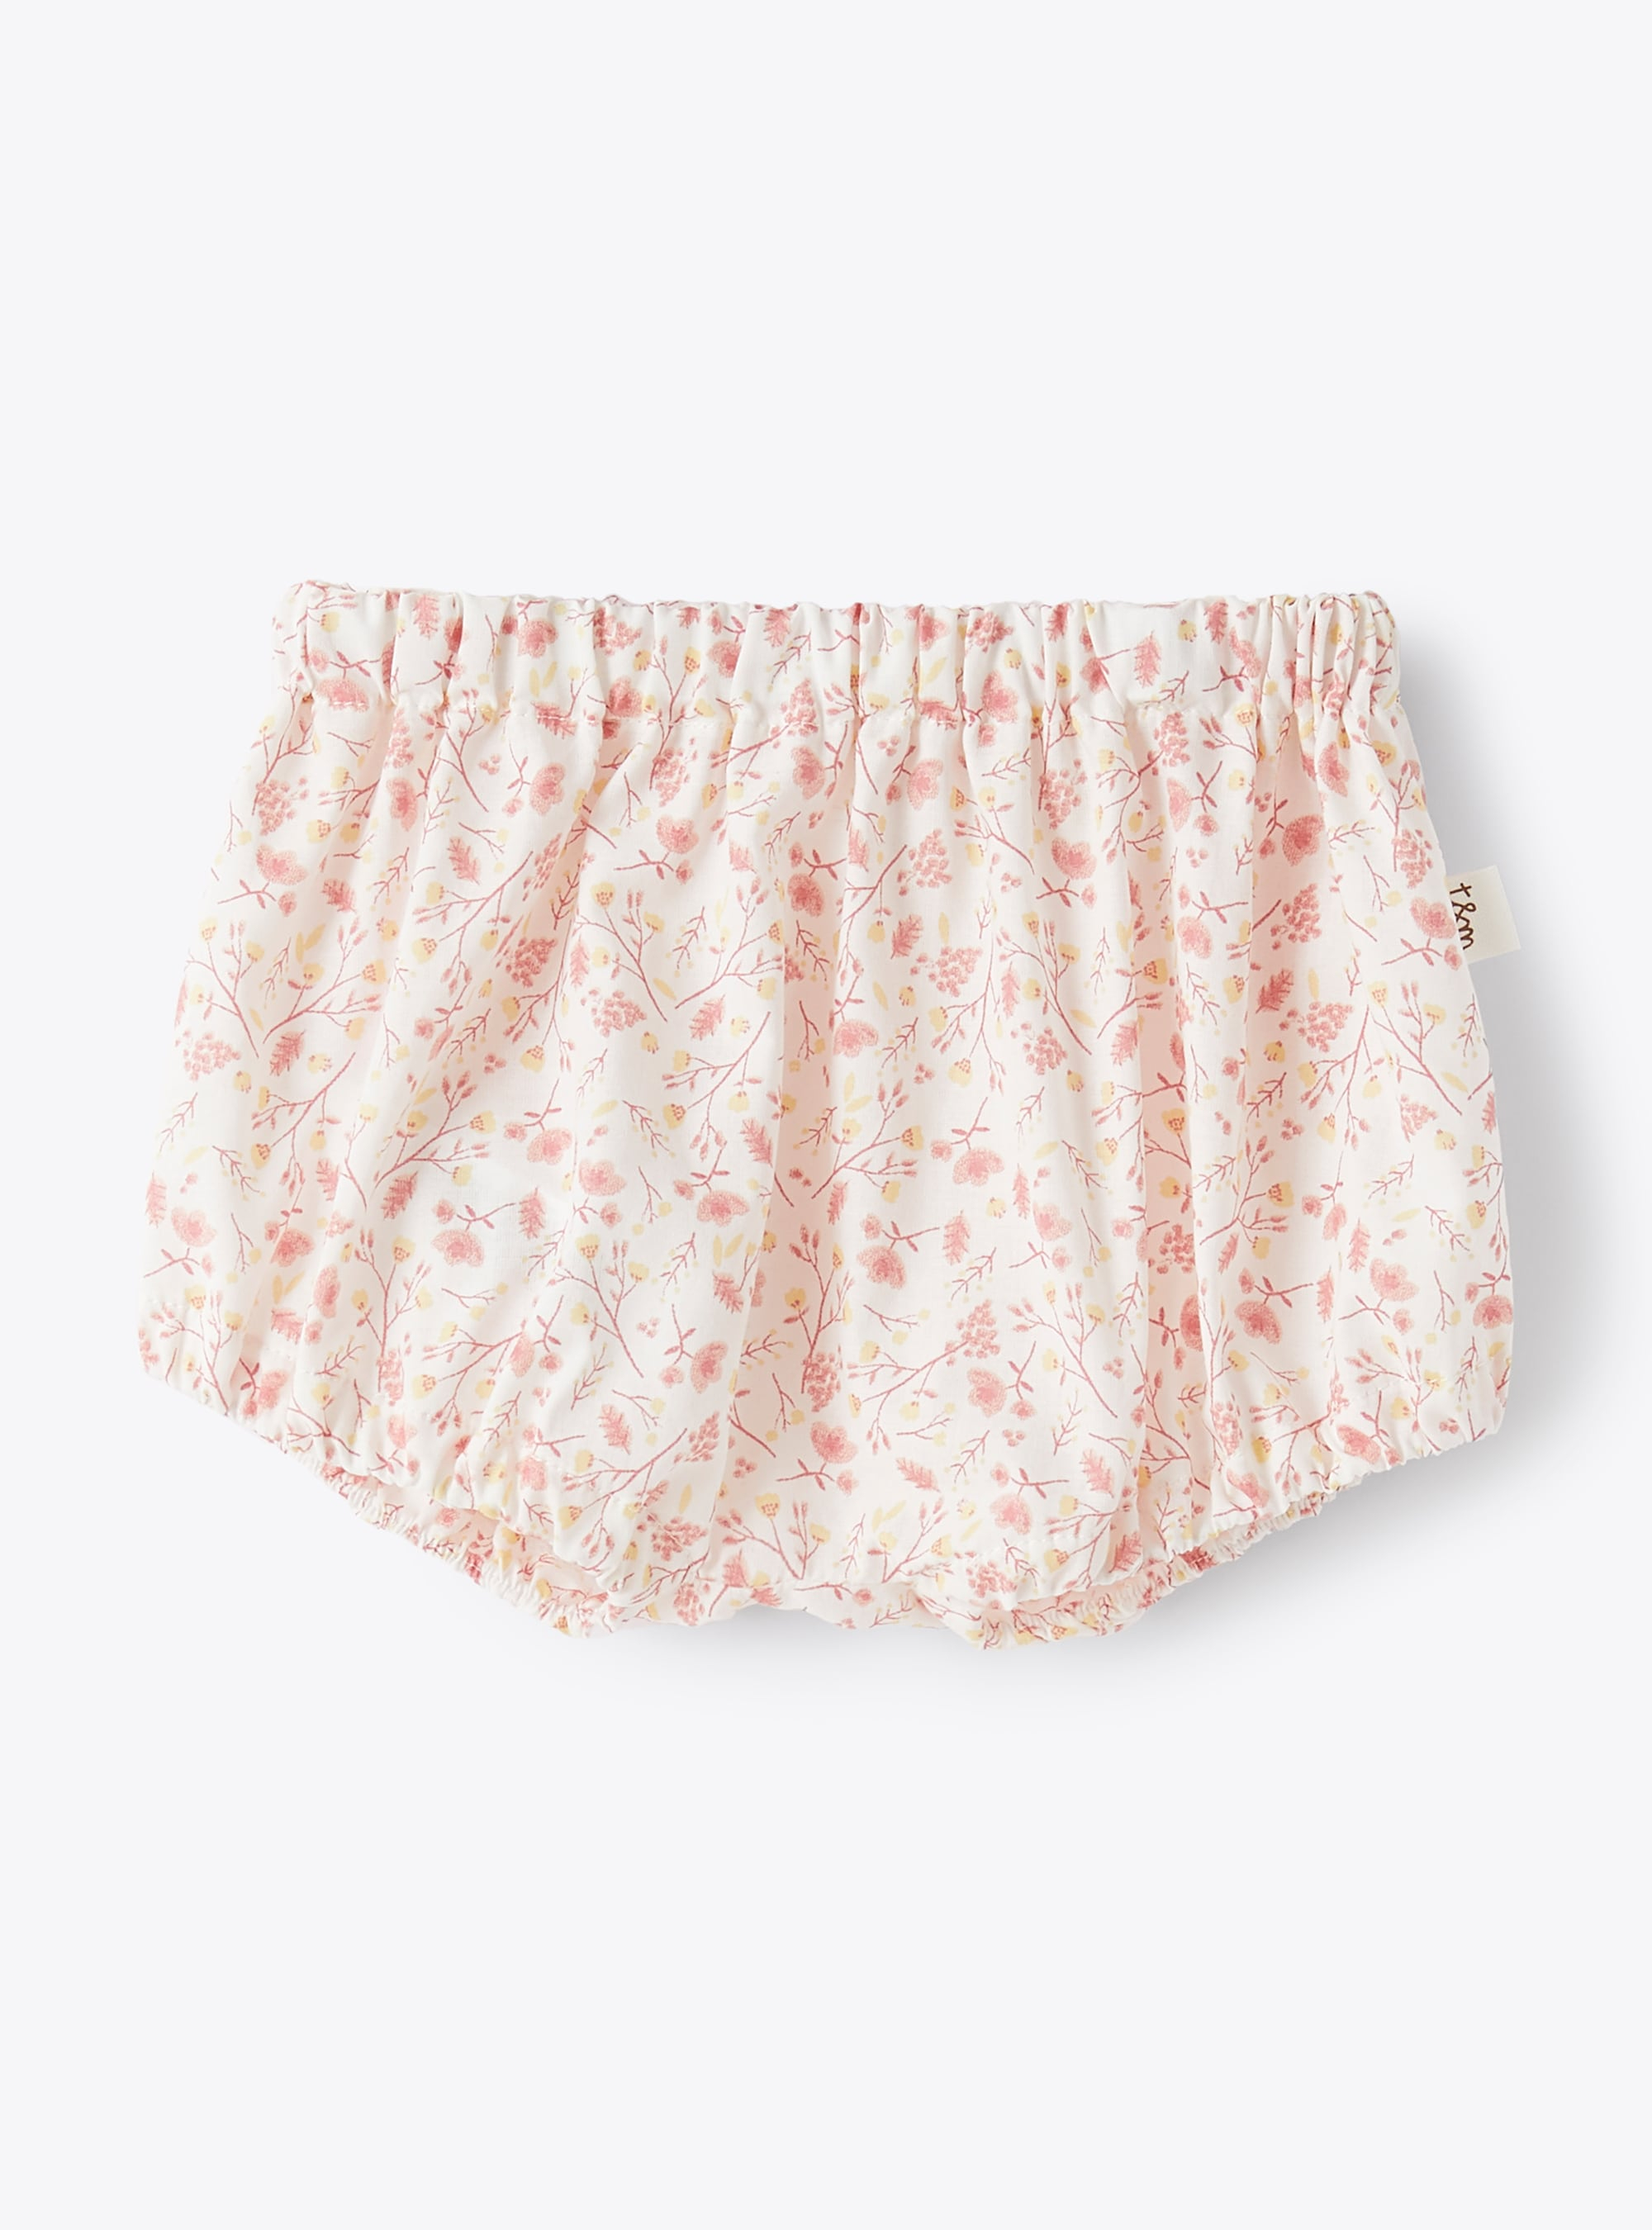 Culotte trousers with flower print - Trousers - Il Gufo